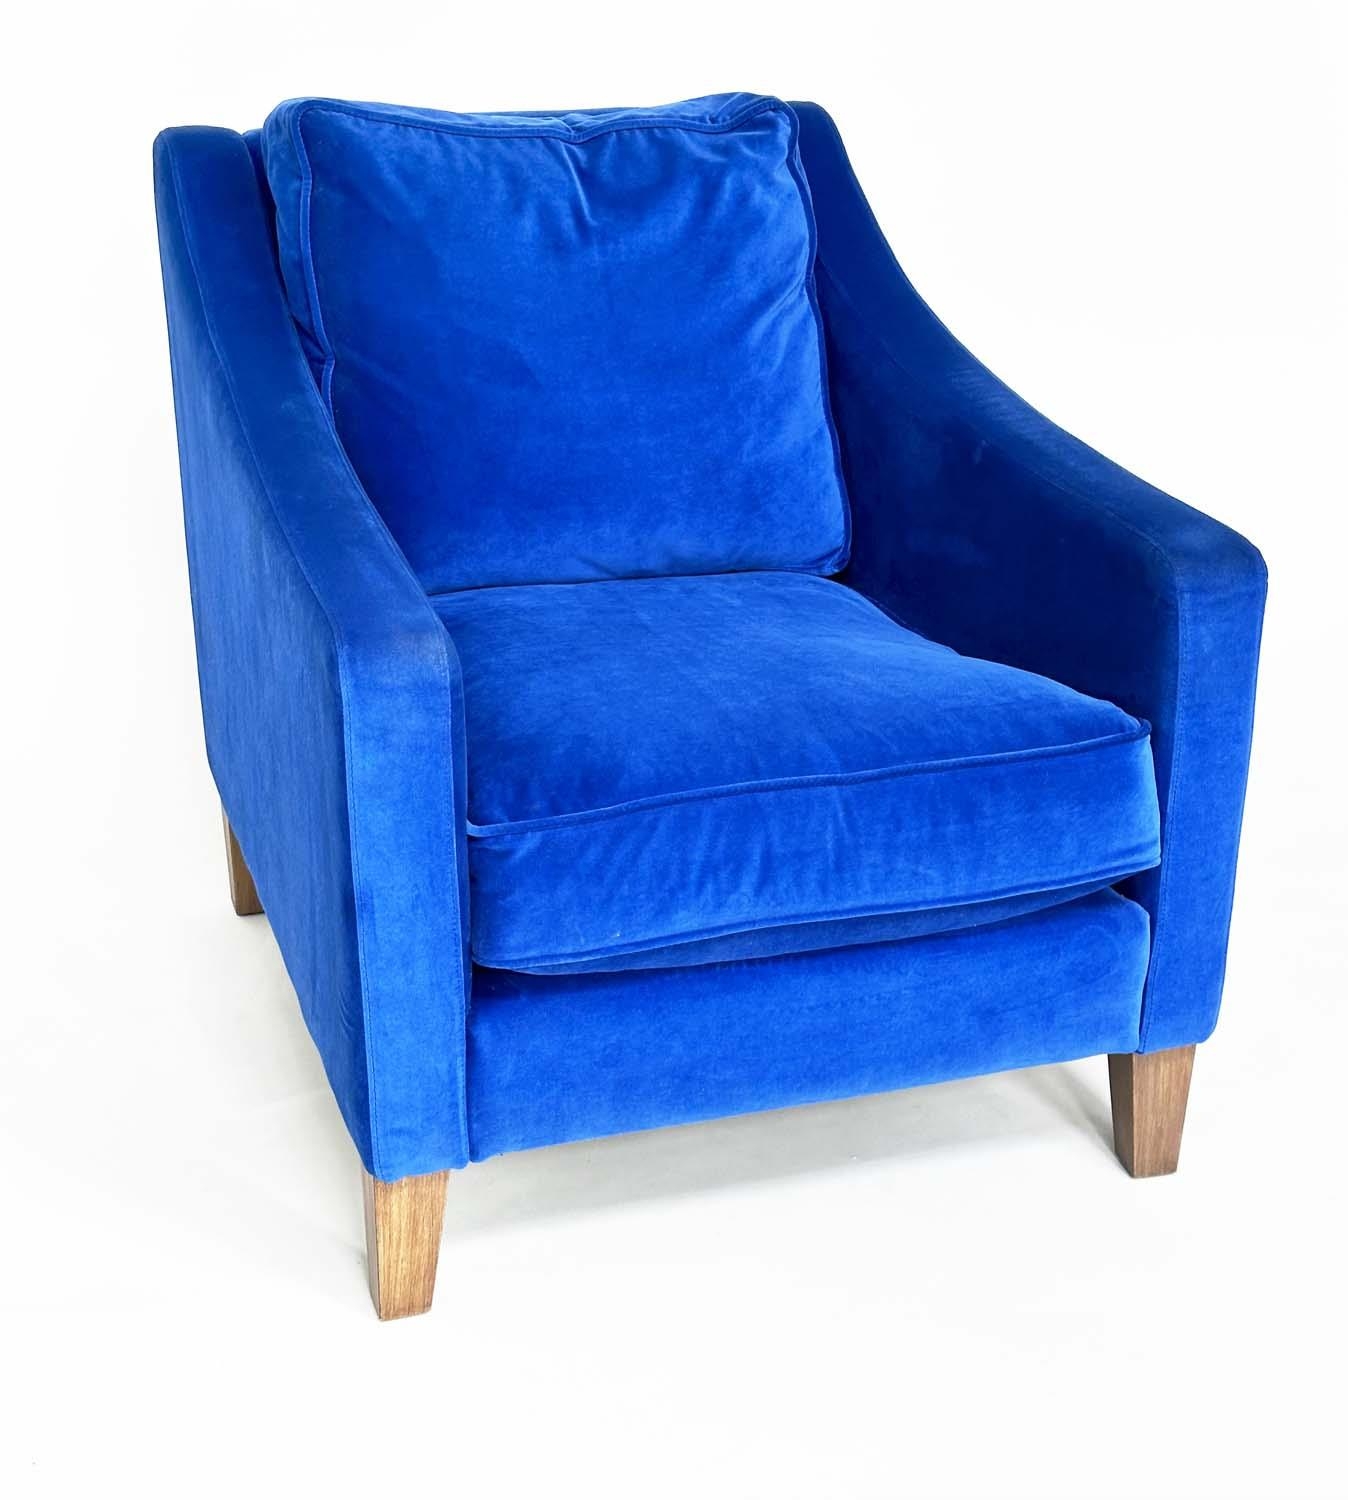 ARMCHAIR, traditional, blue velvet upholstered with soft cushions and tapering supports, Sofa.com, - Image 10 of 11